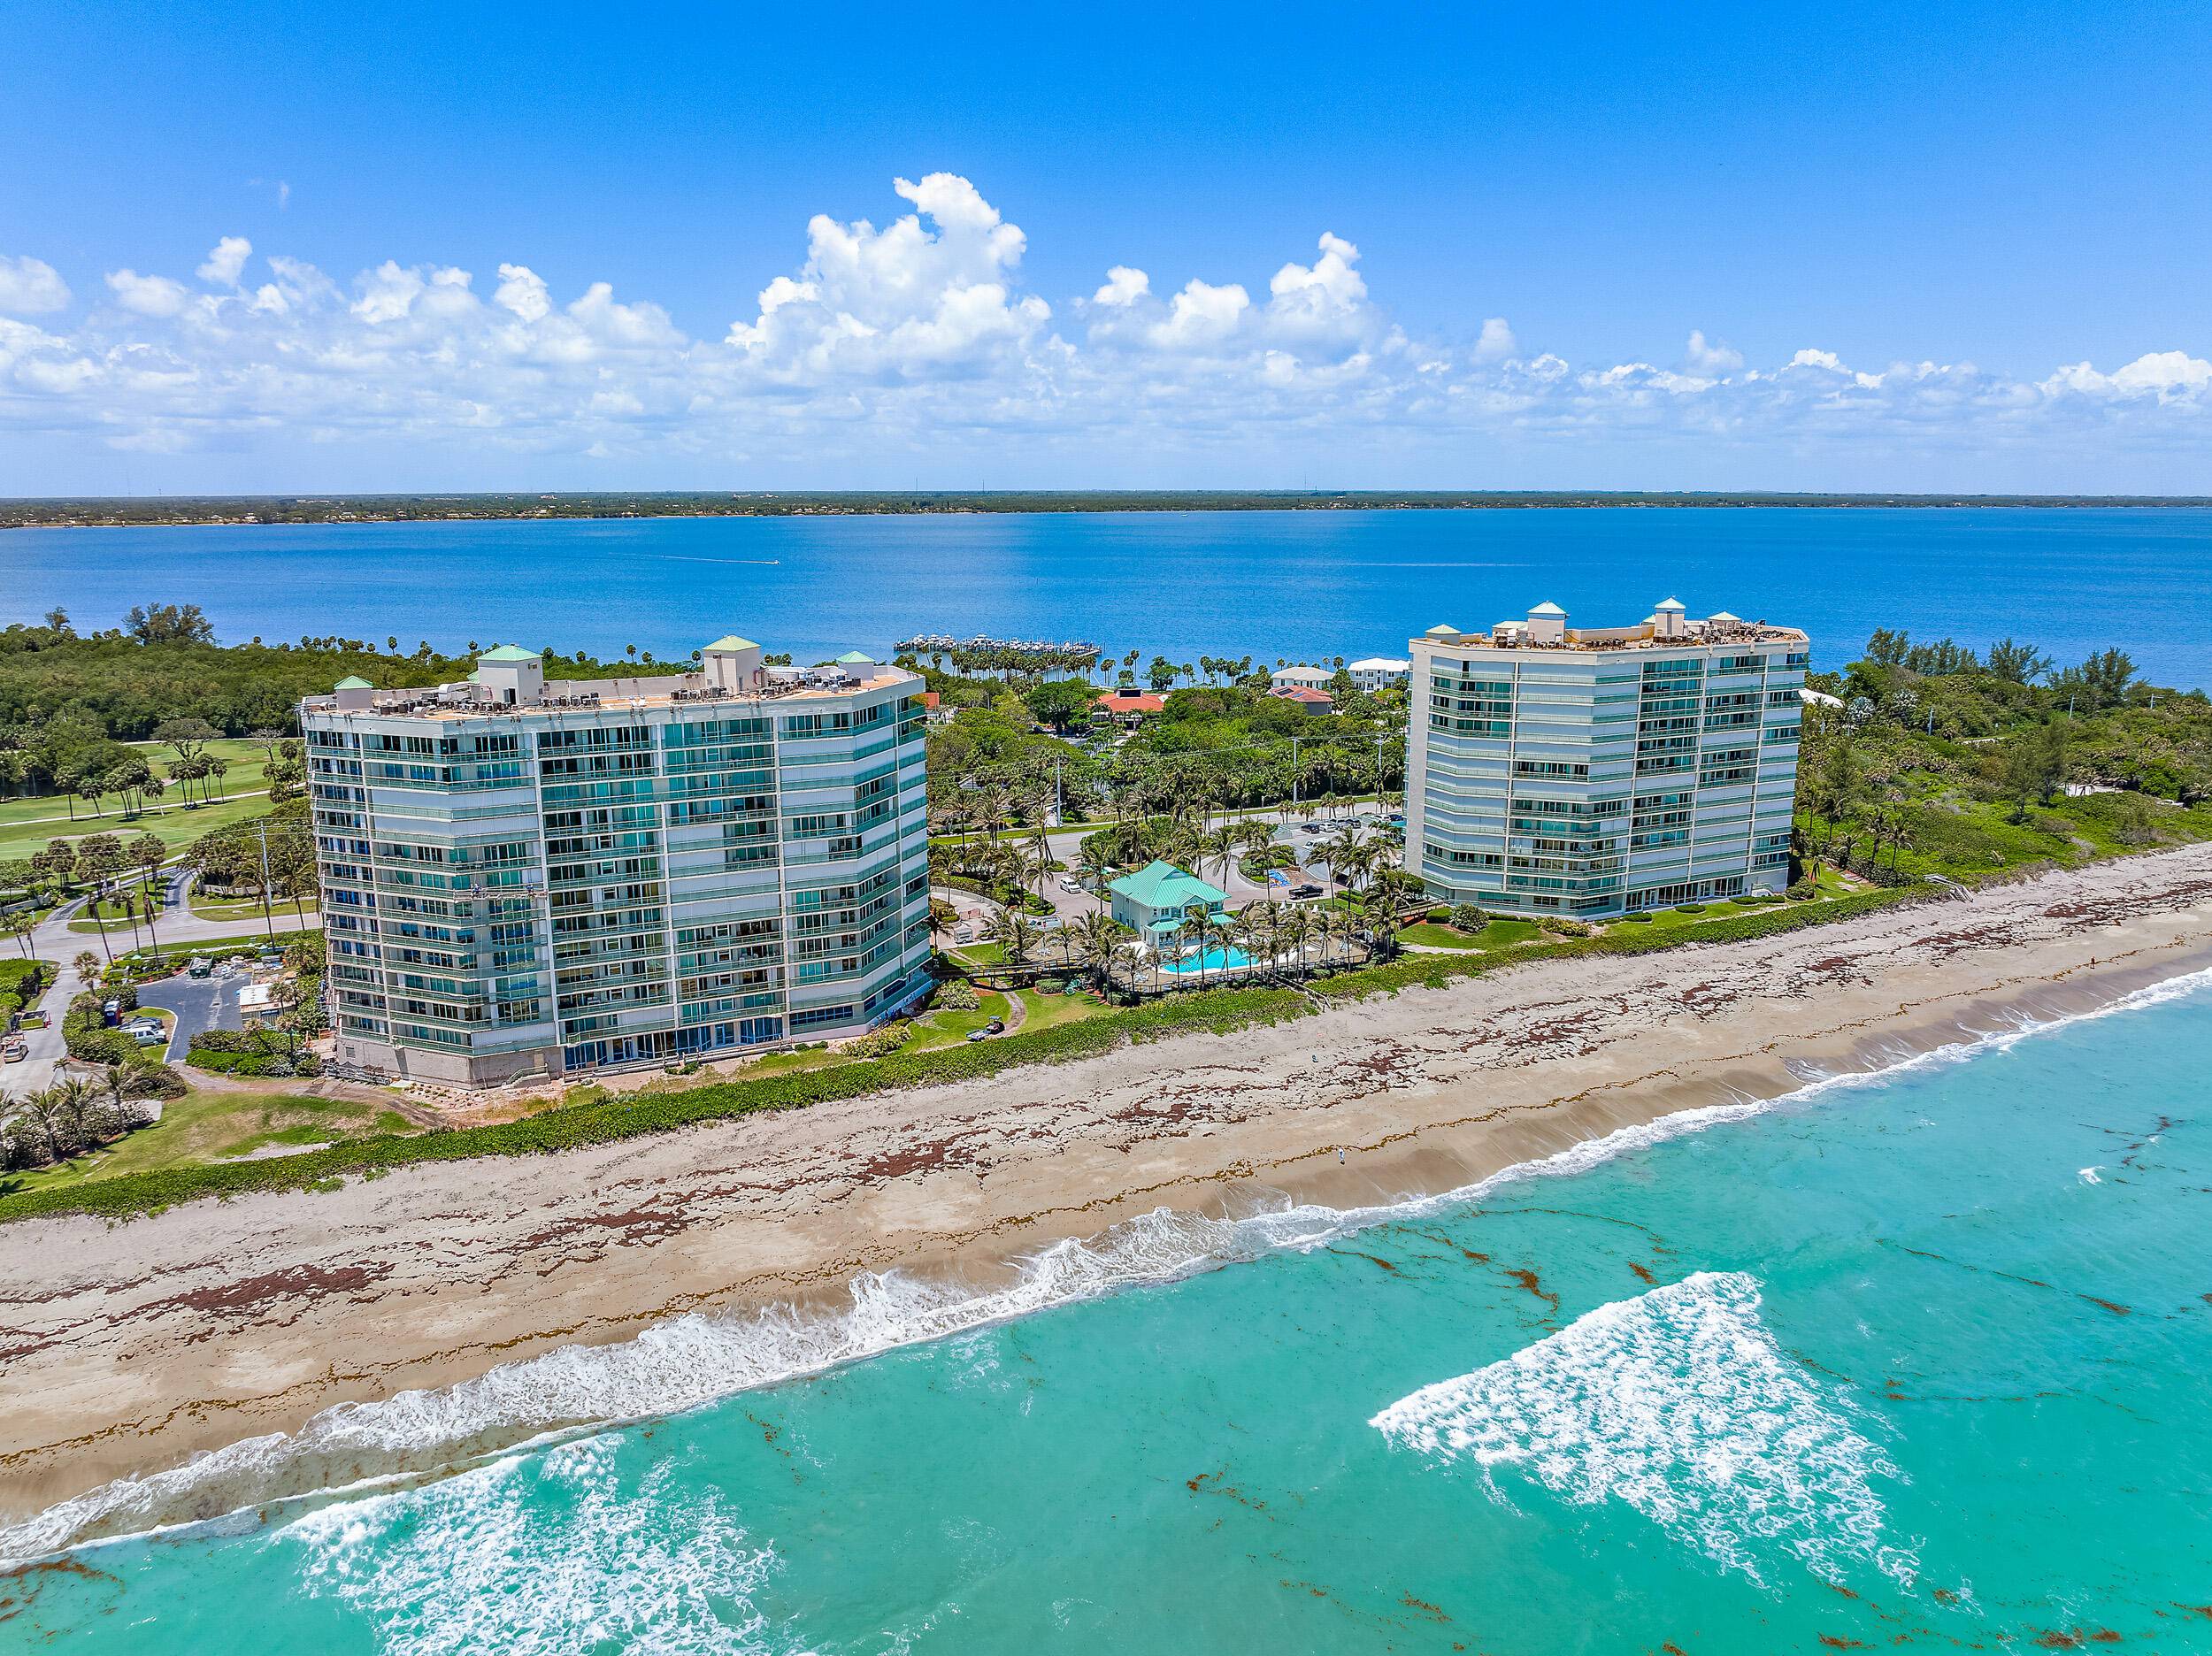 Welcome to Regency Island Dunes, a stunning oceanfront oasis nestled on the pristine shores of Hutchinson Island.